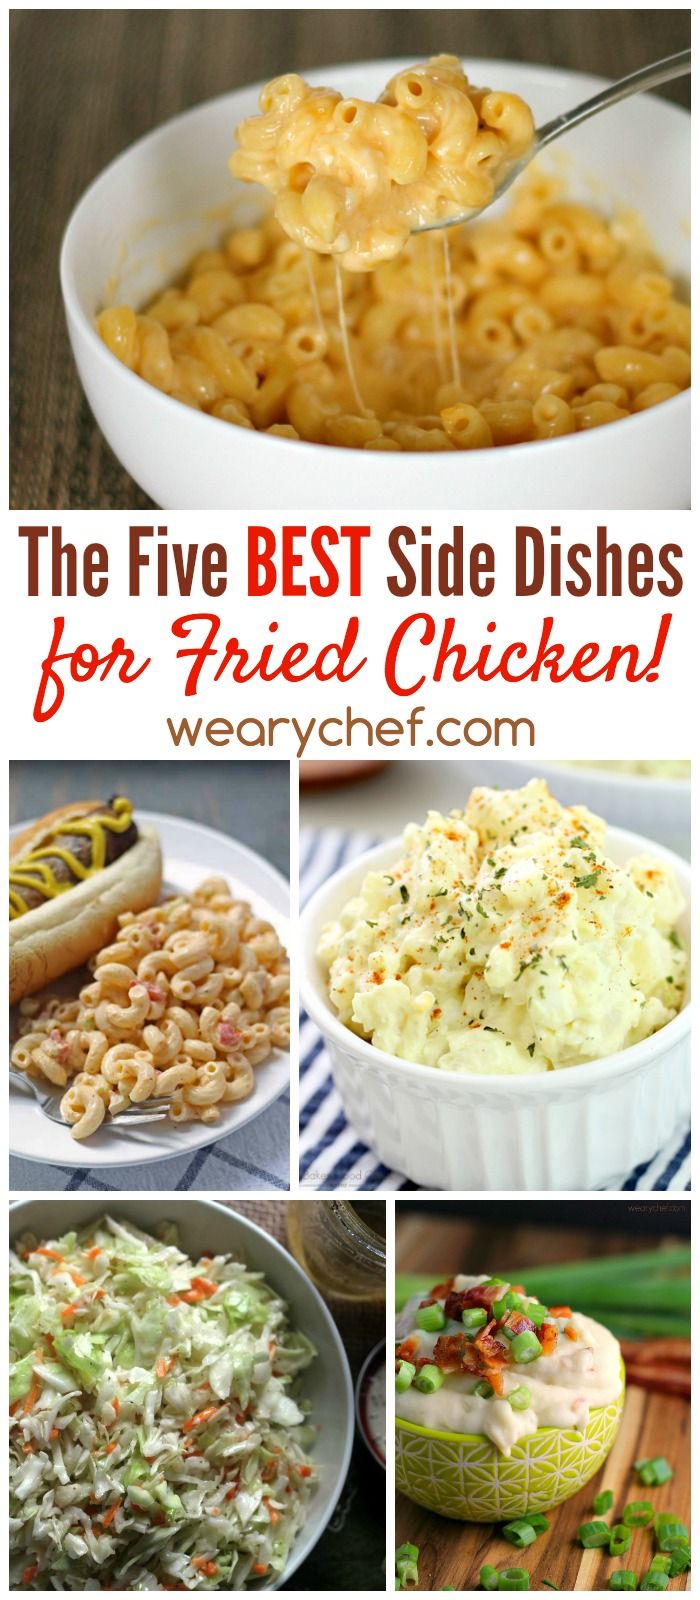 Healthy Side Dishes For Chicken Fried Steak